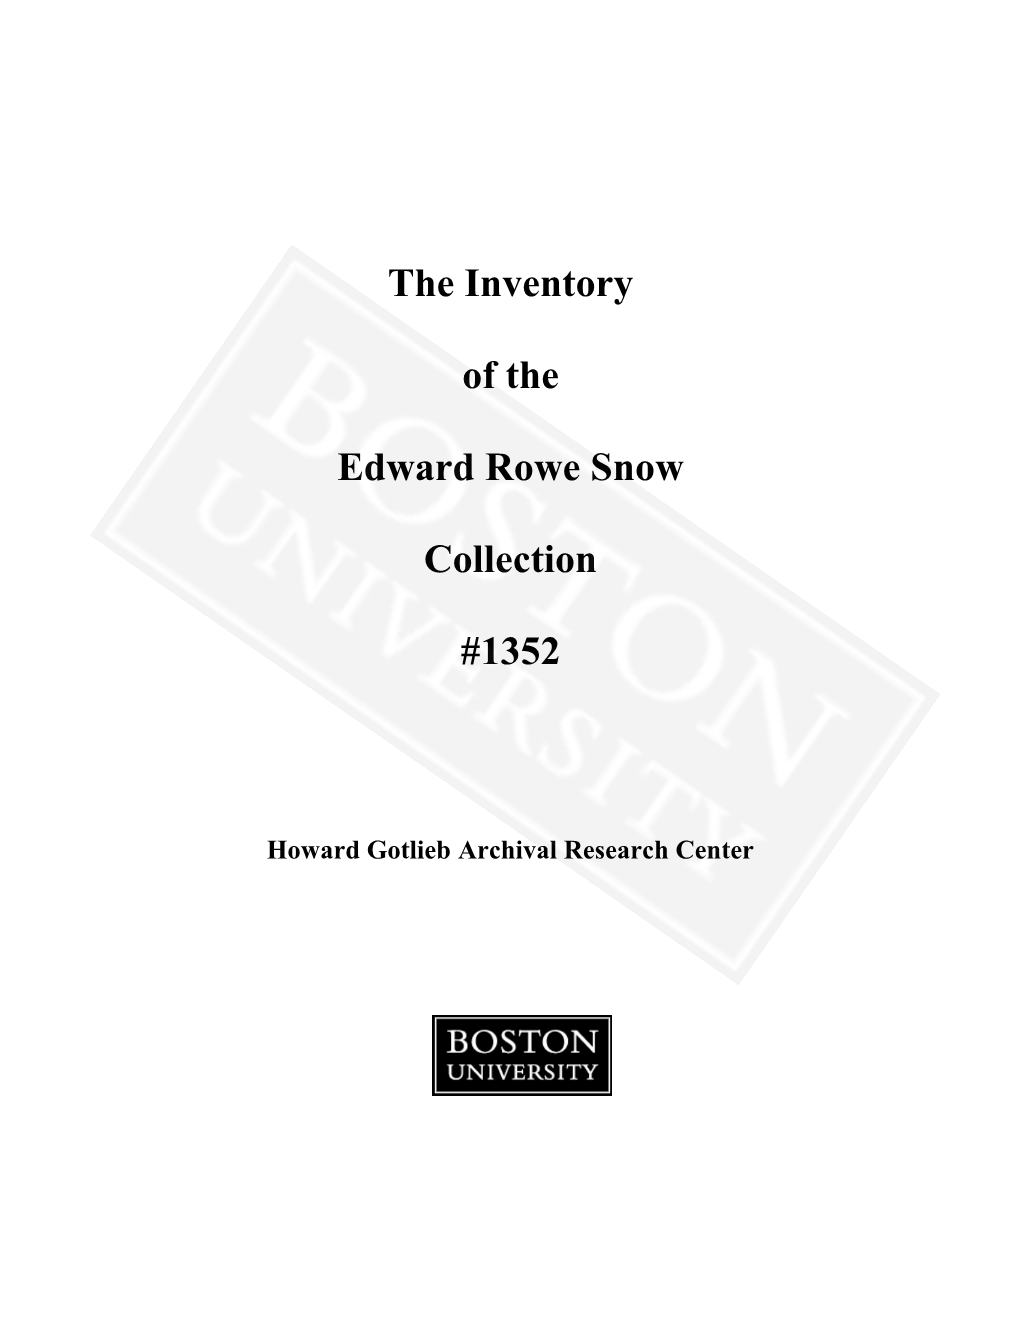 The Inventory of the Edward Rowe Snow Collection #1352